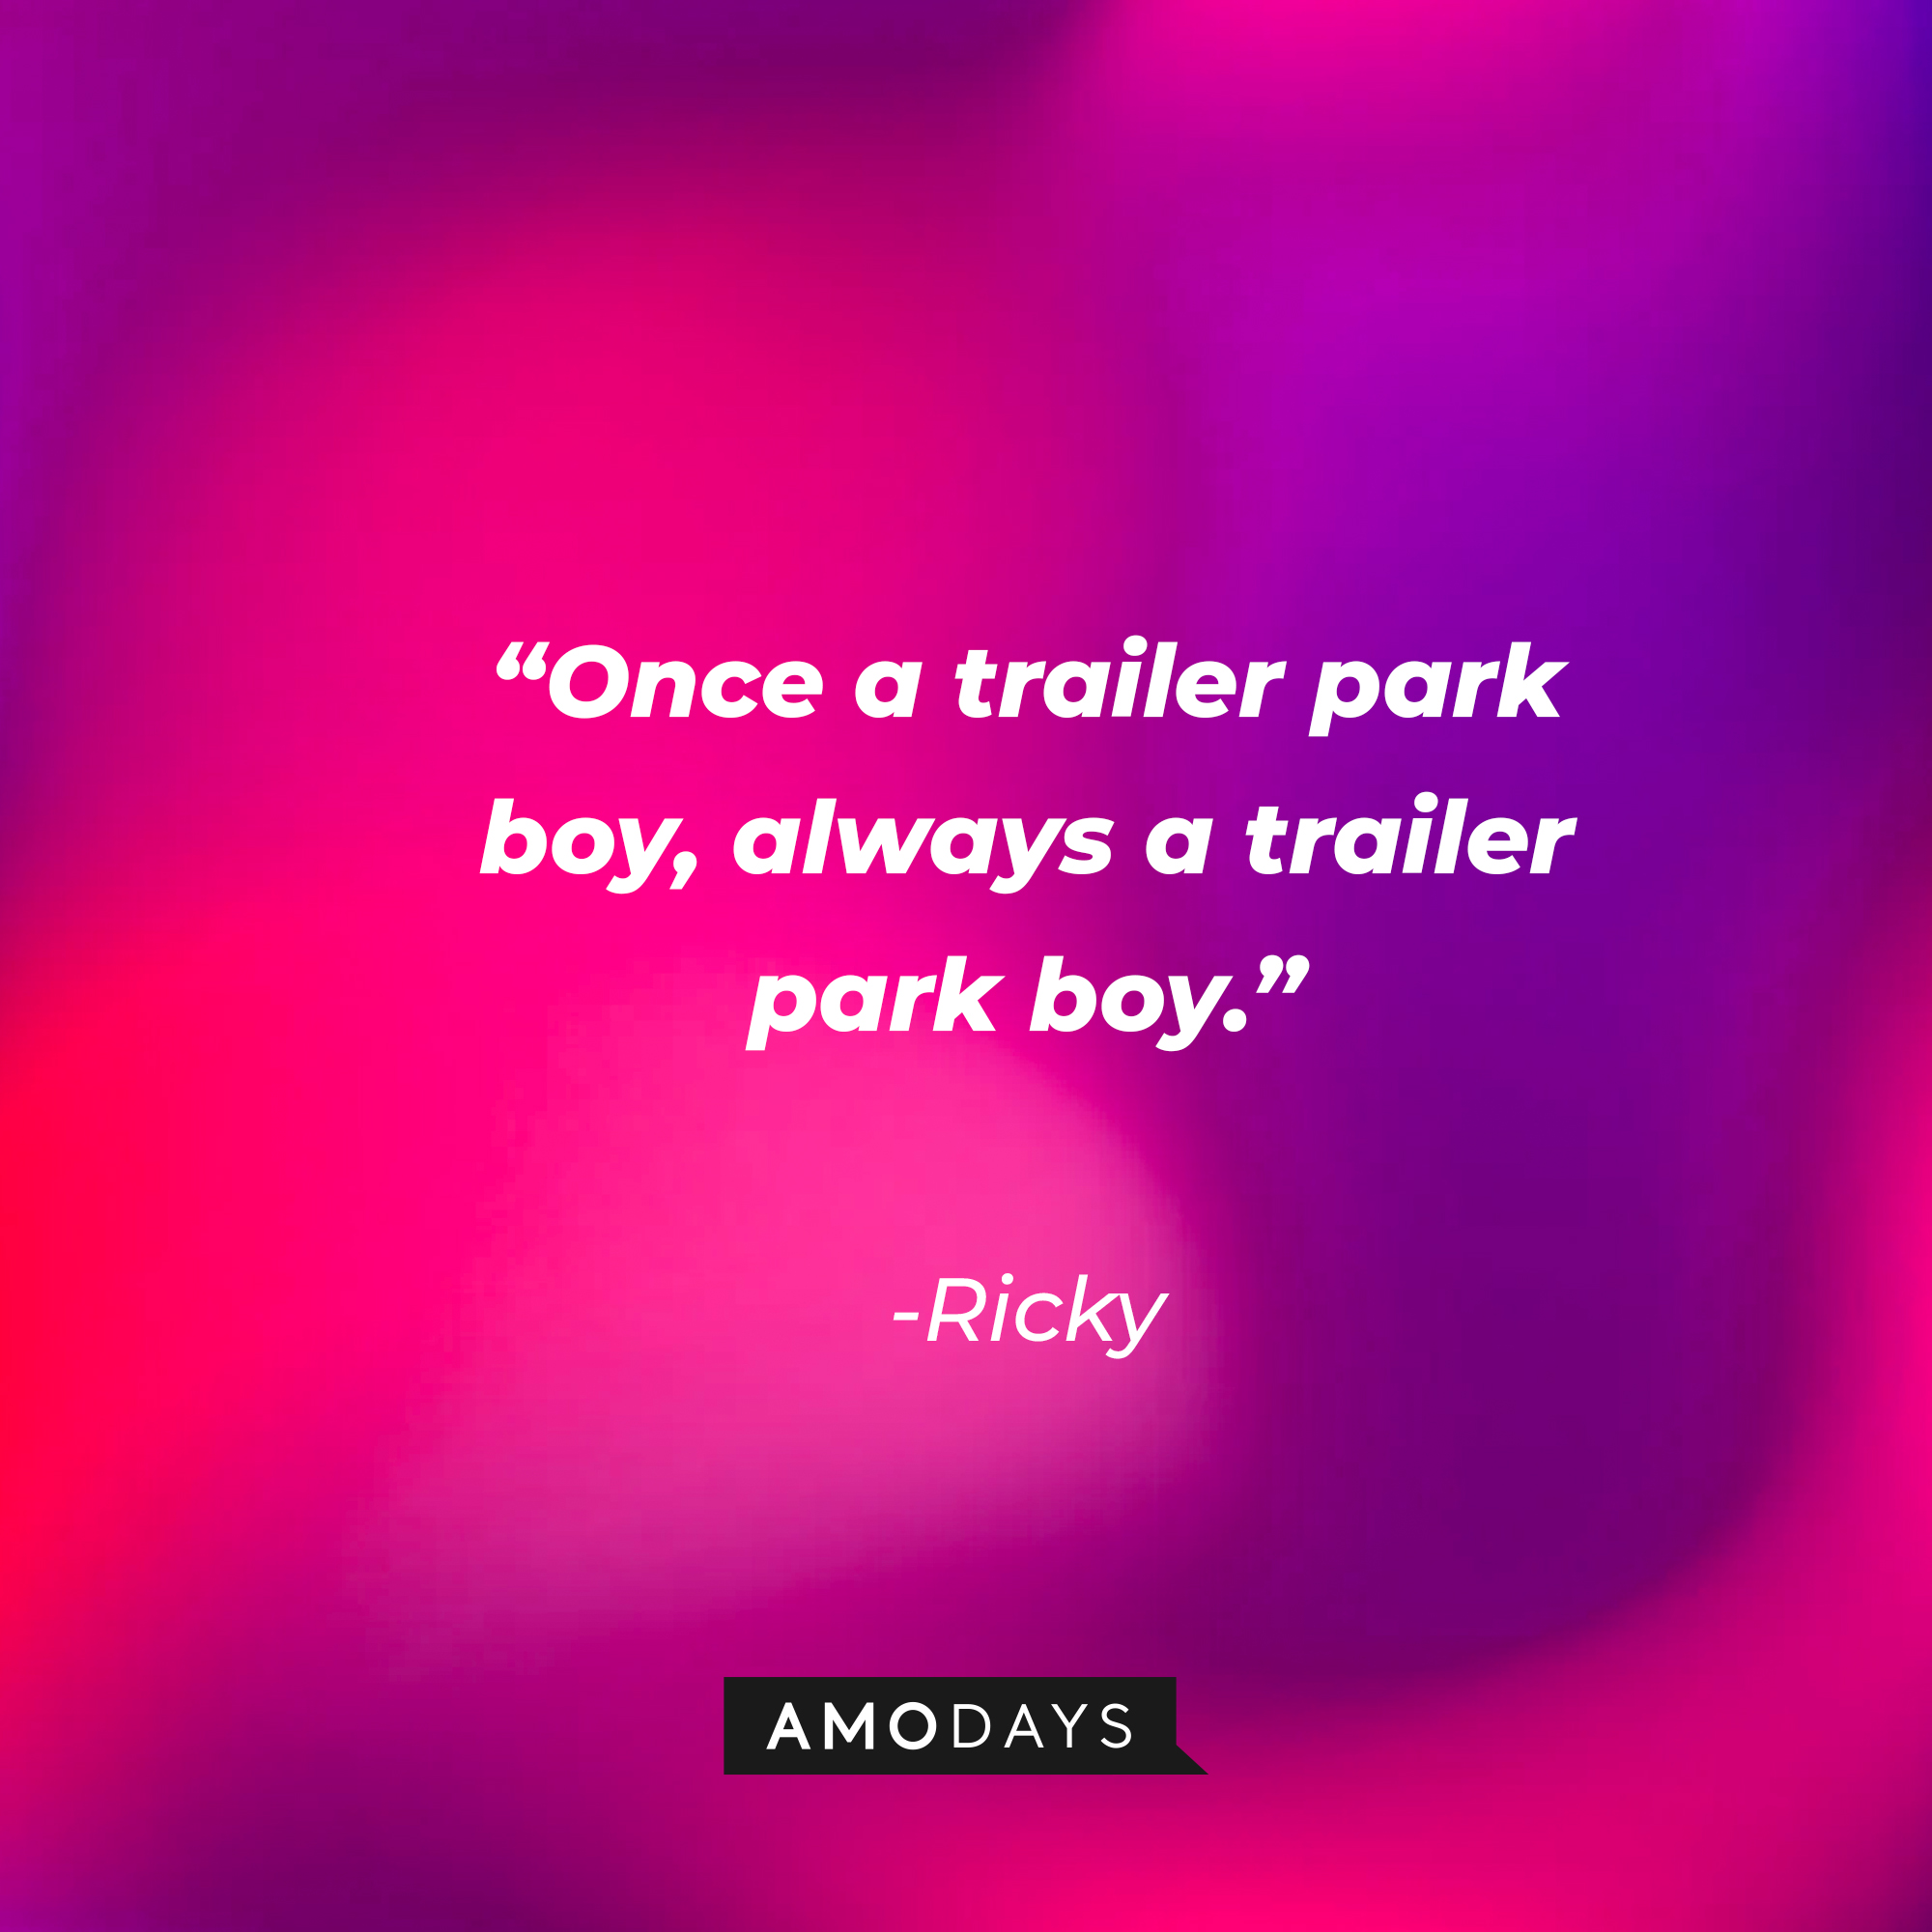 Ricky's quote: “Once a trailer park boy, always a trailer park boy.” | Source: Amodays